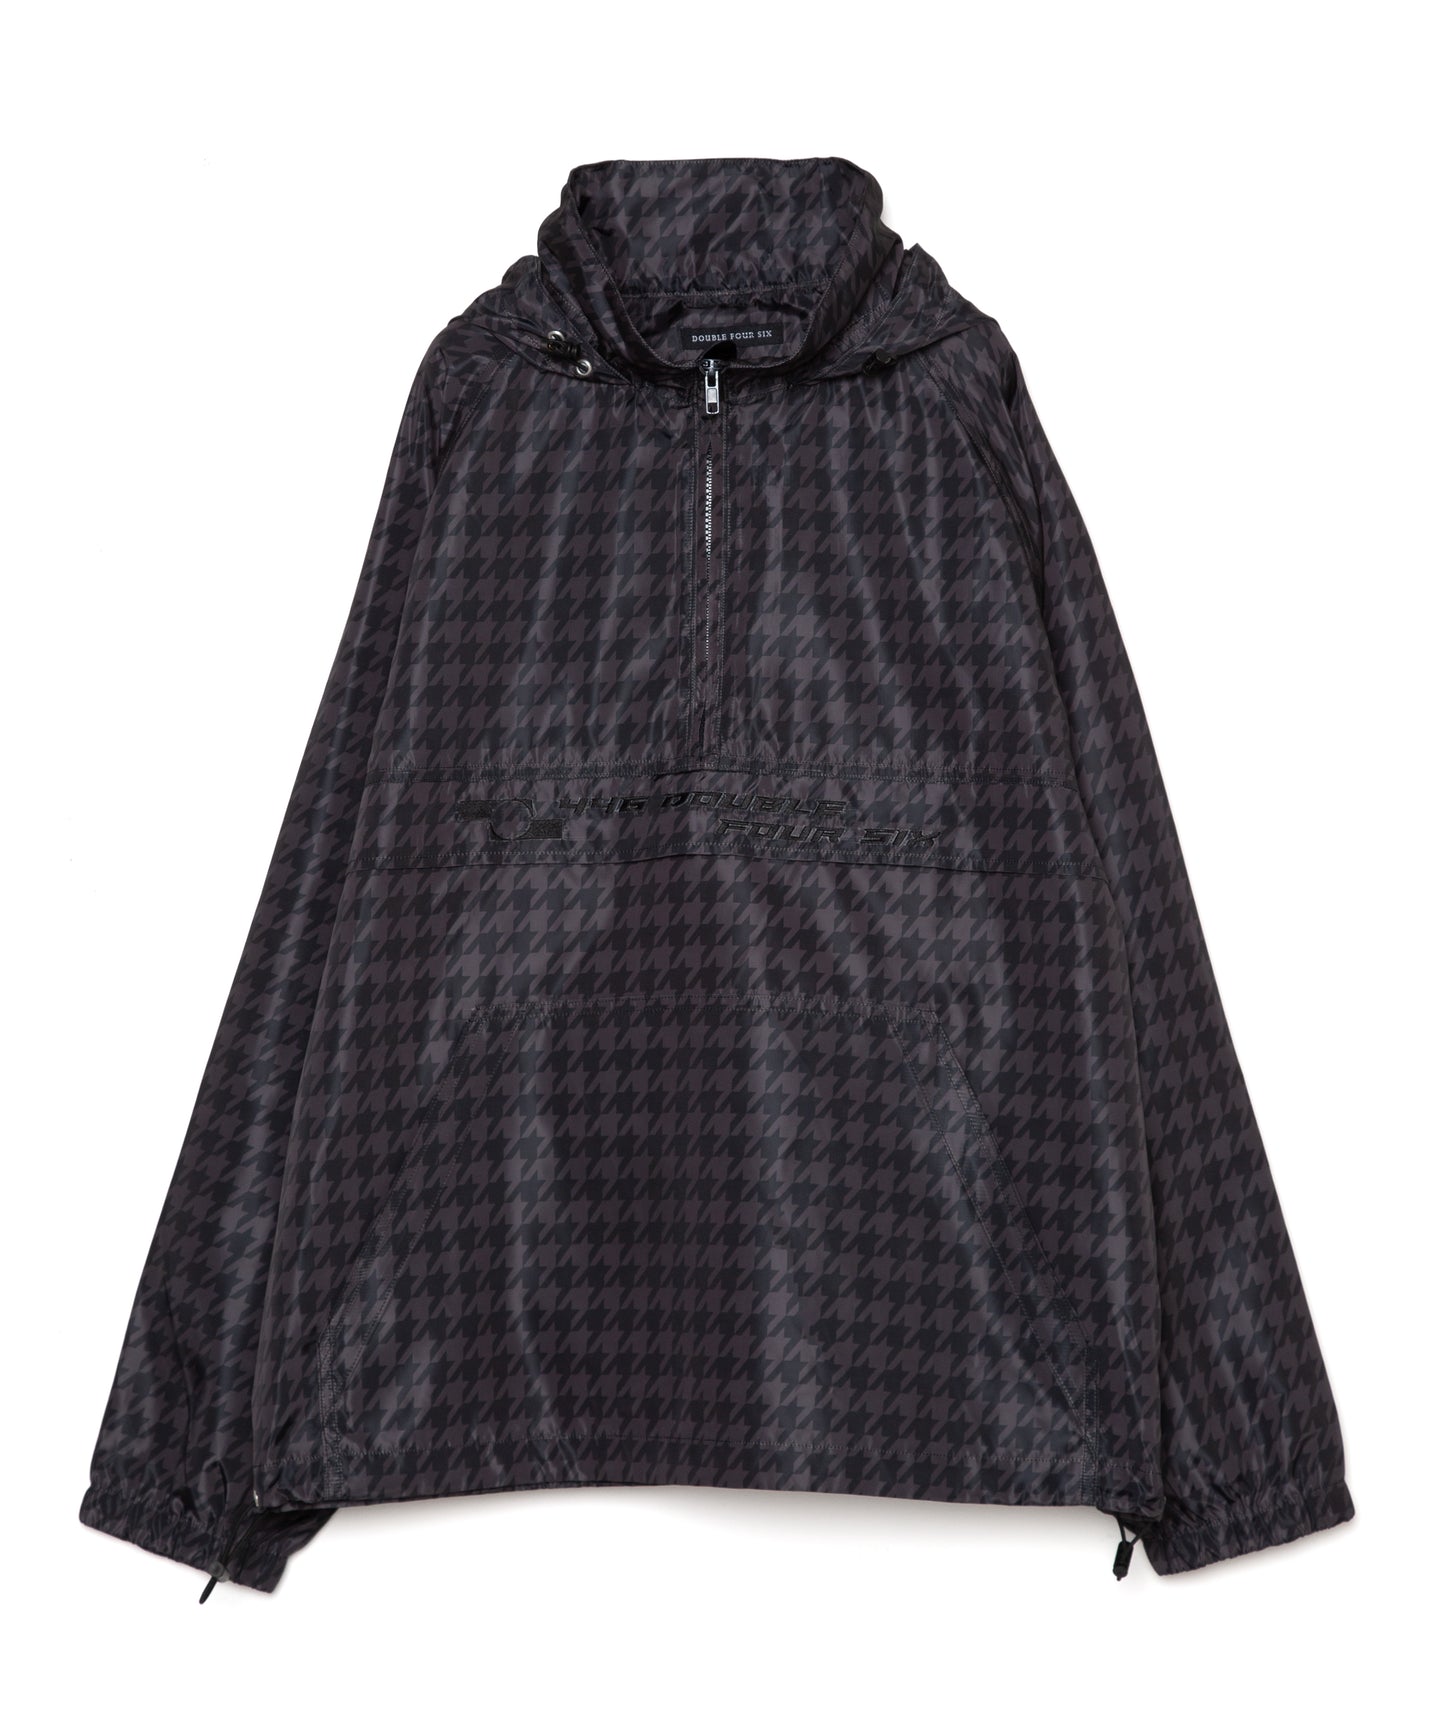 DOUBLE FOUR SIX-Houndstooth Pattern Front Logo Hoodie Chidori Black